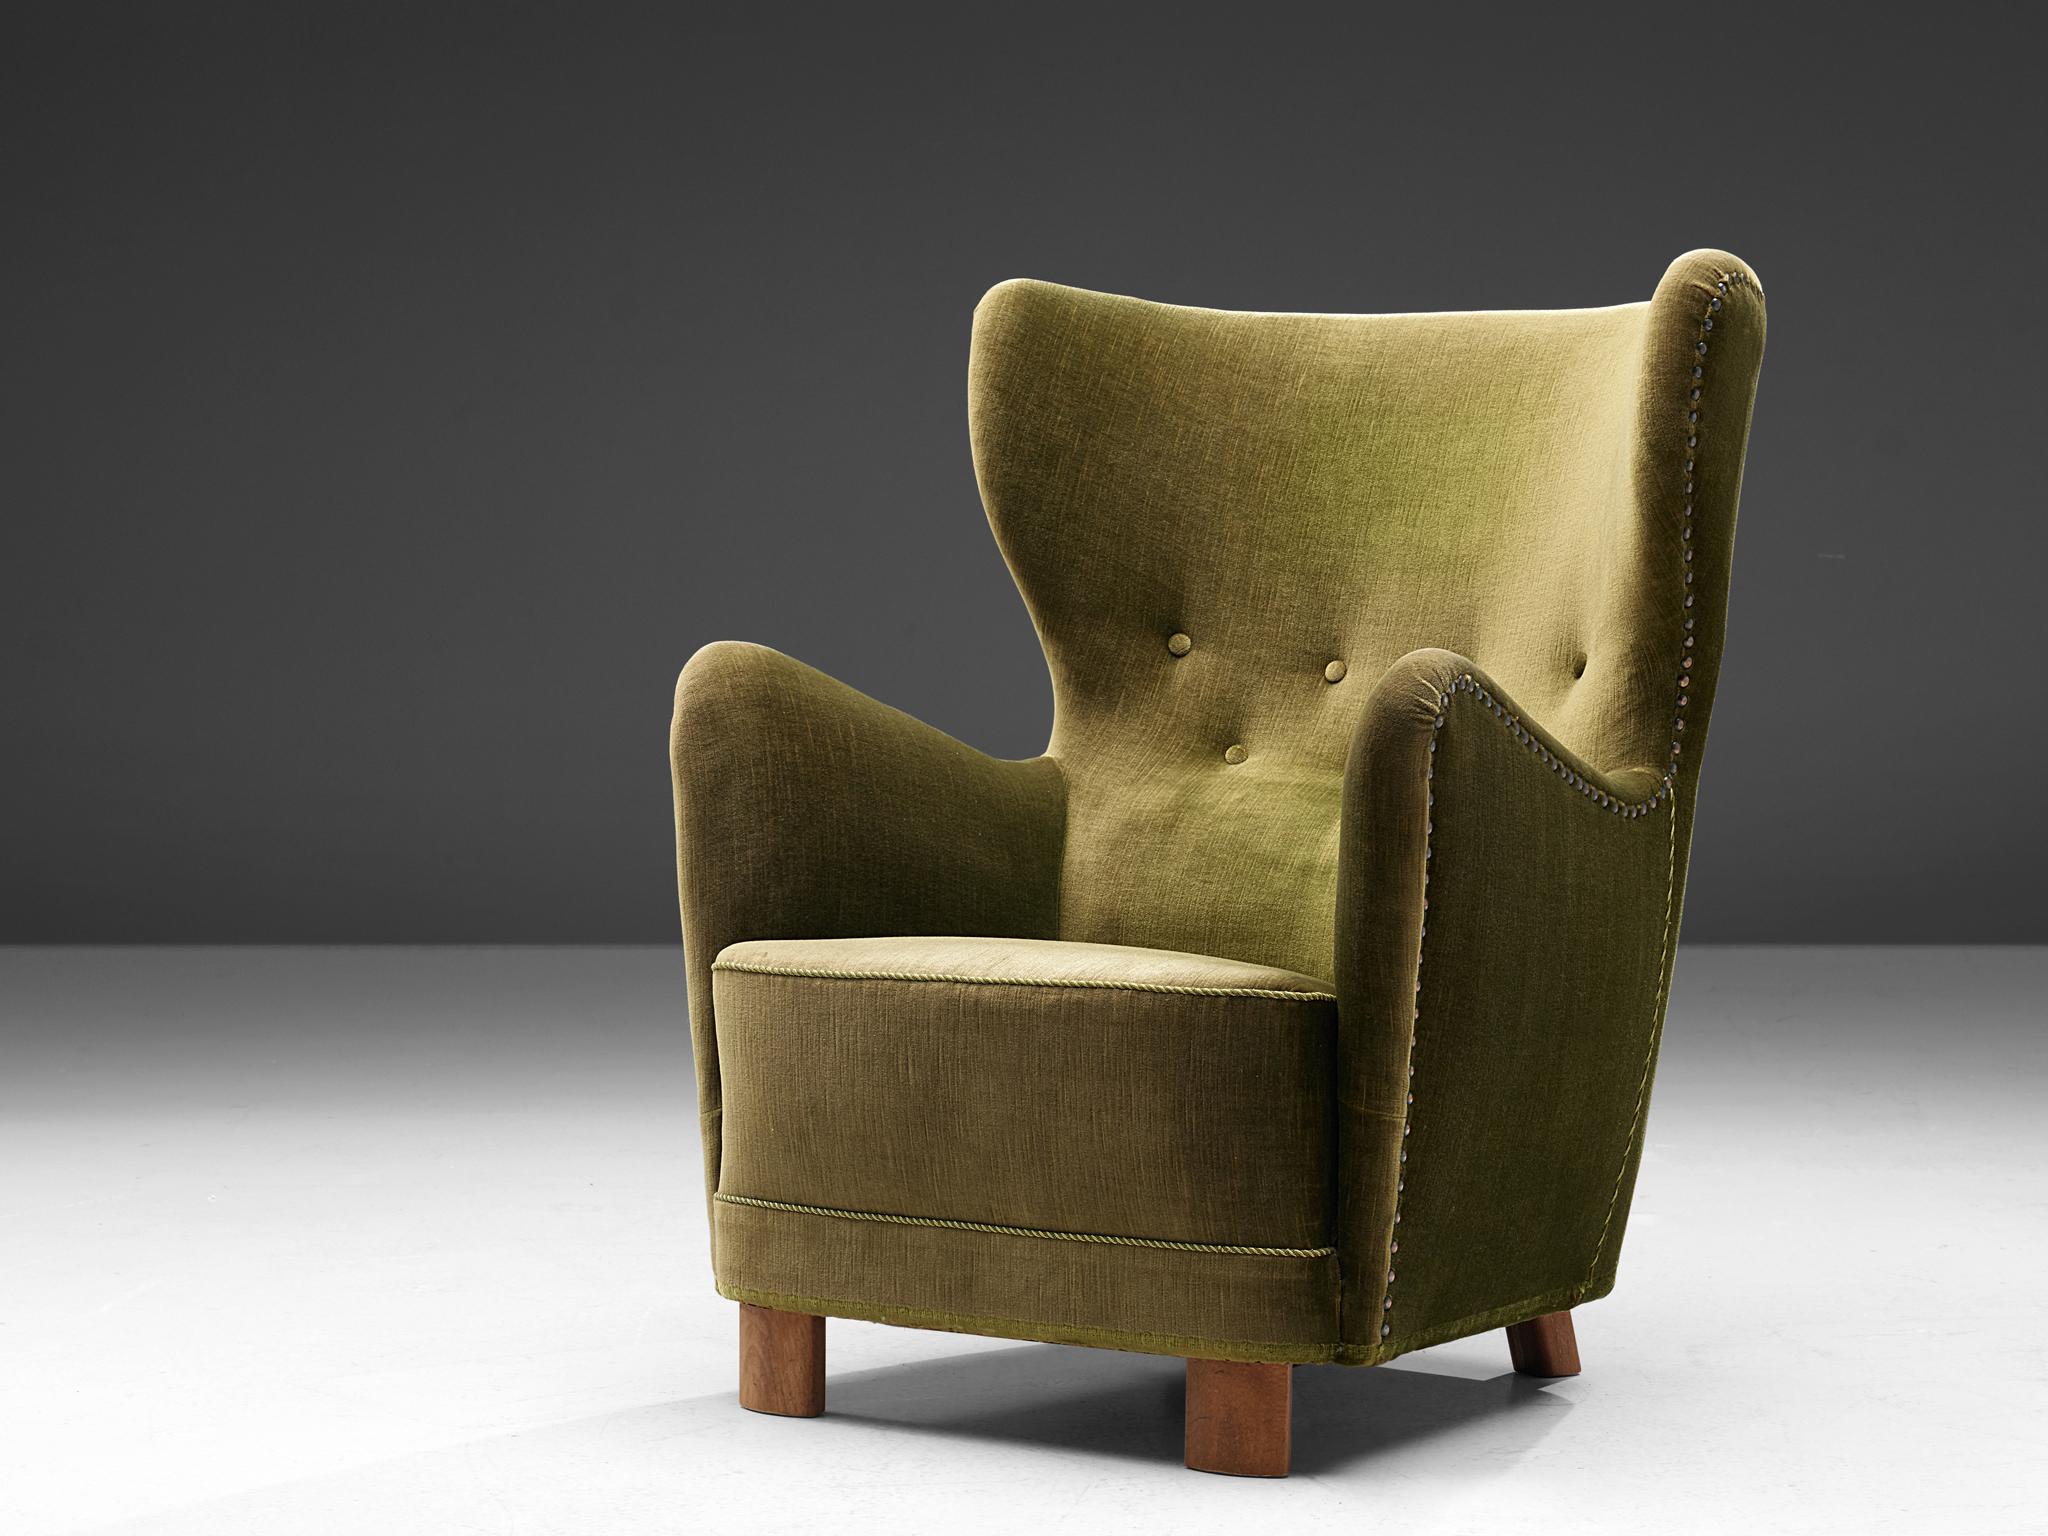 Wingback armchair in green upholstery, Denmark, 1950s.

The wingback chair is upholstered in a green velvet fabric and is finished with a green rope covering the straight seams. On the side of the chair the fabric is secured using furniture nails,